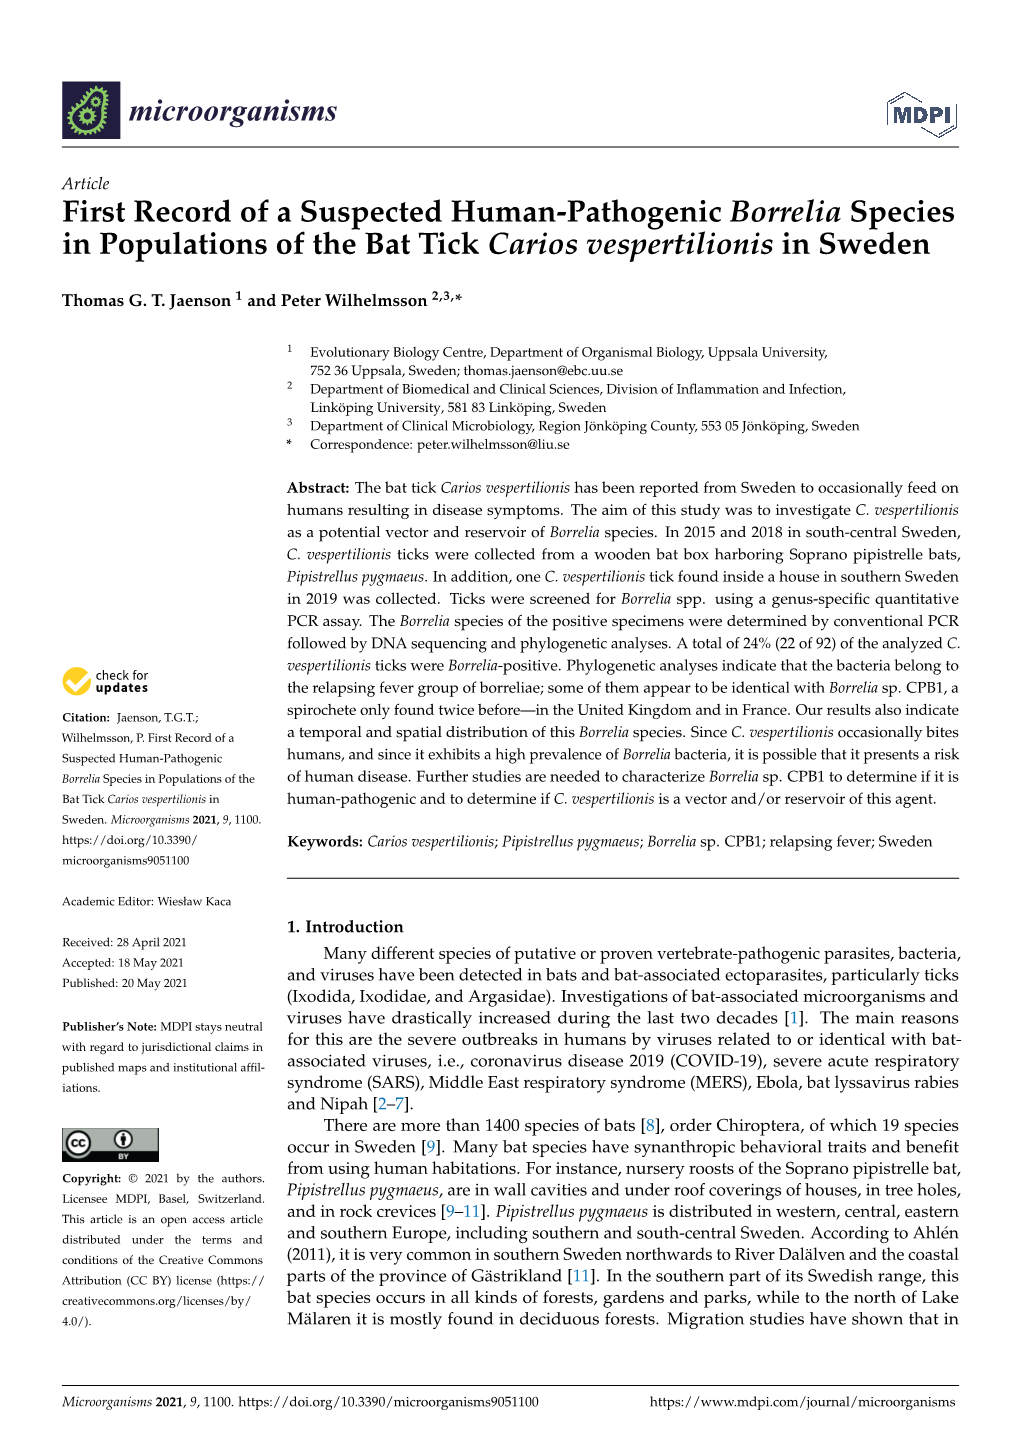 First Record of a Suspected Human-Pathogenic Borrelia Species in Populations of the Bat Tick Carios Vespertilionis in Sweden